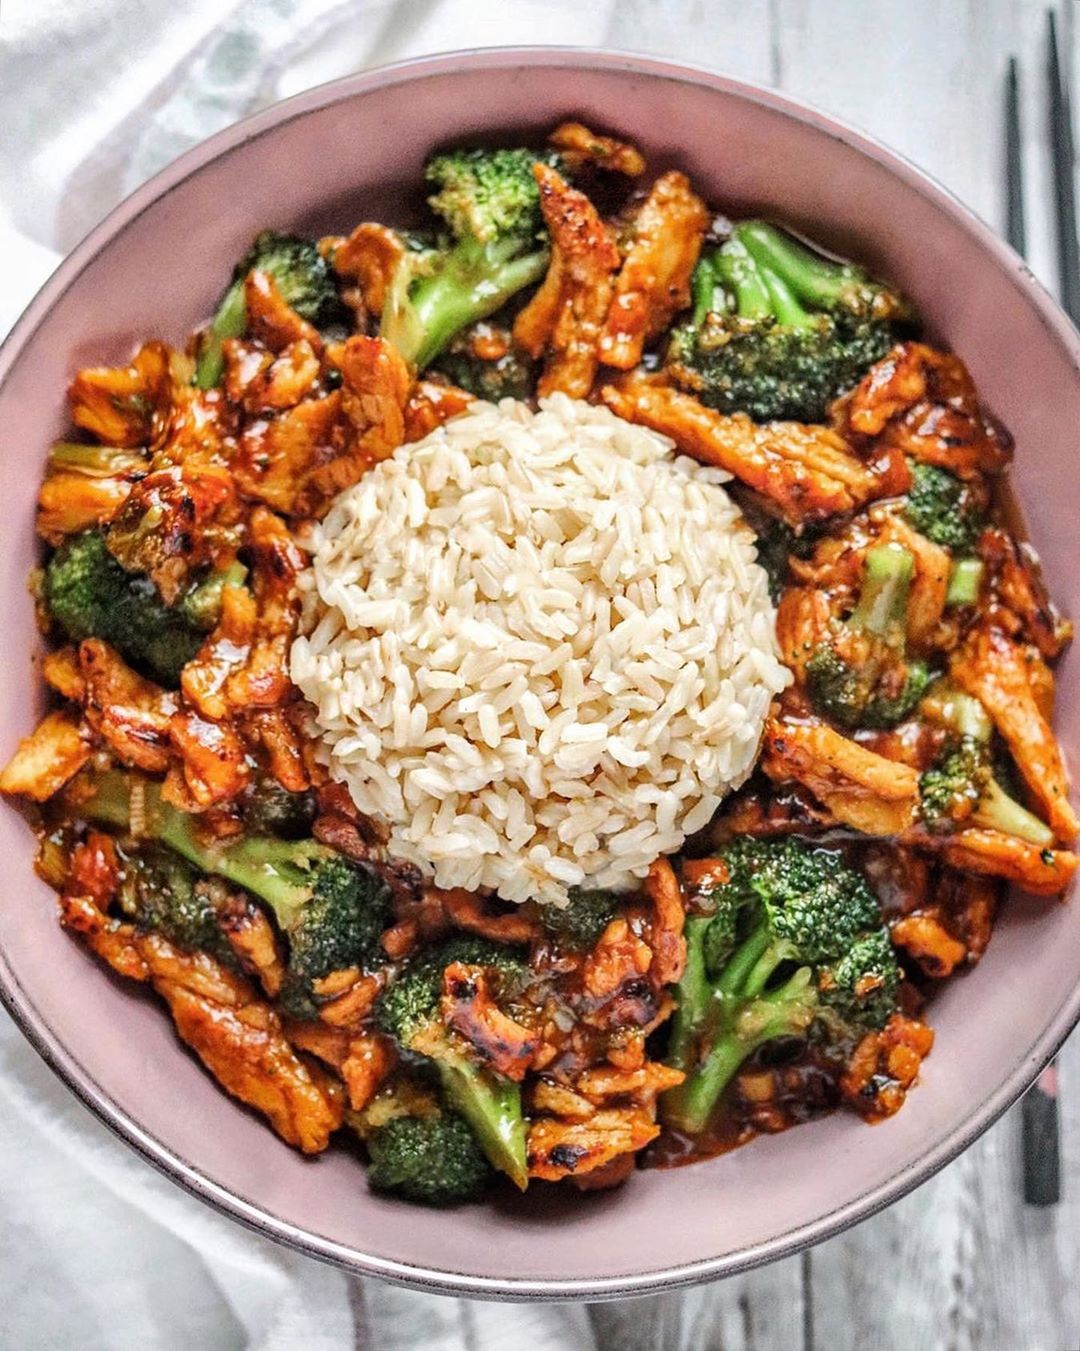 Saucy Soy Curls with Broccoli and Brown Rice